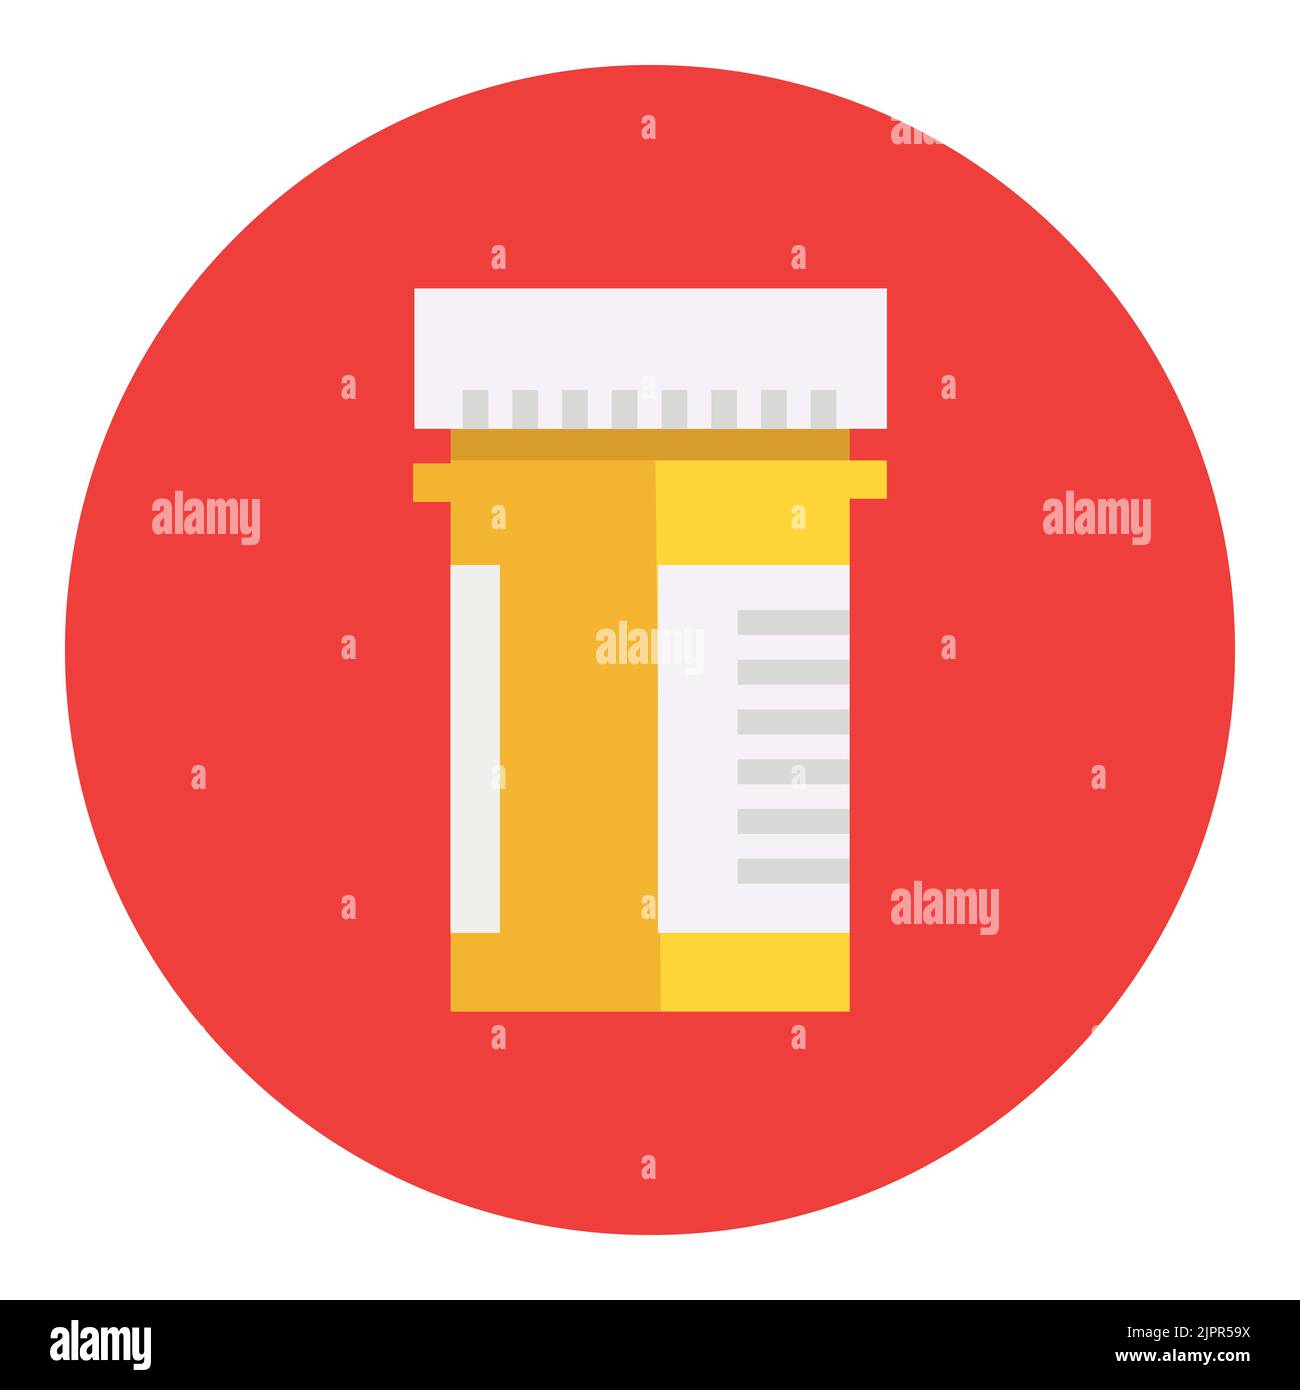 Pill bottle icon. Capsule prescription flat icon. Drug container logo design. Flat medical icon isolated on white background. Vector icon Stock Vector